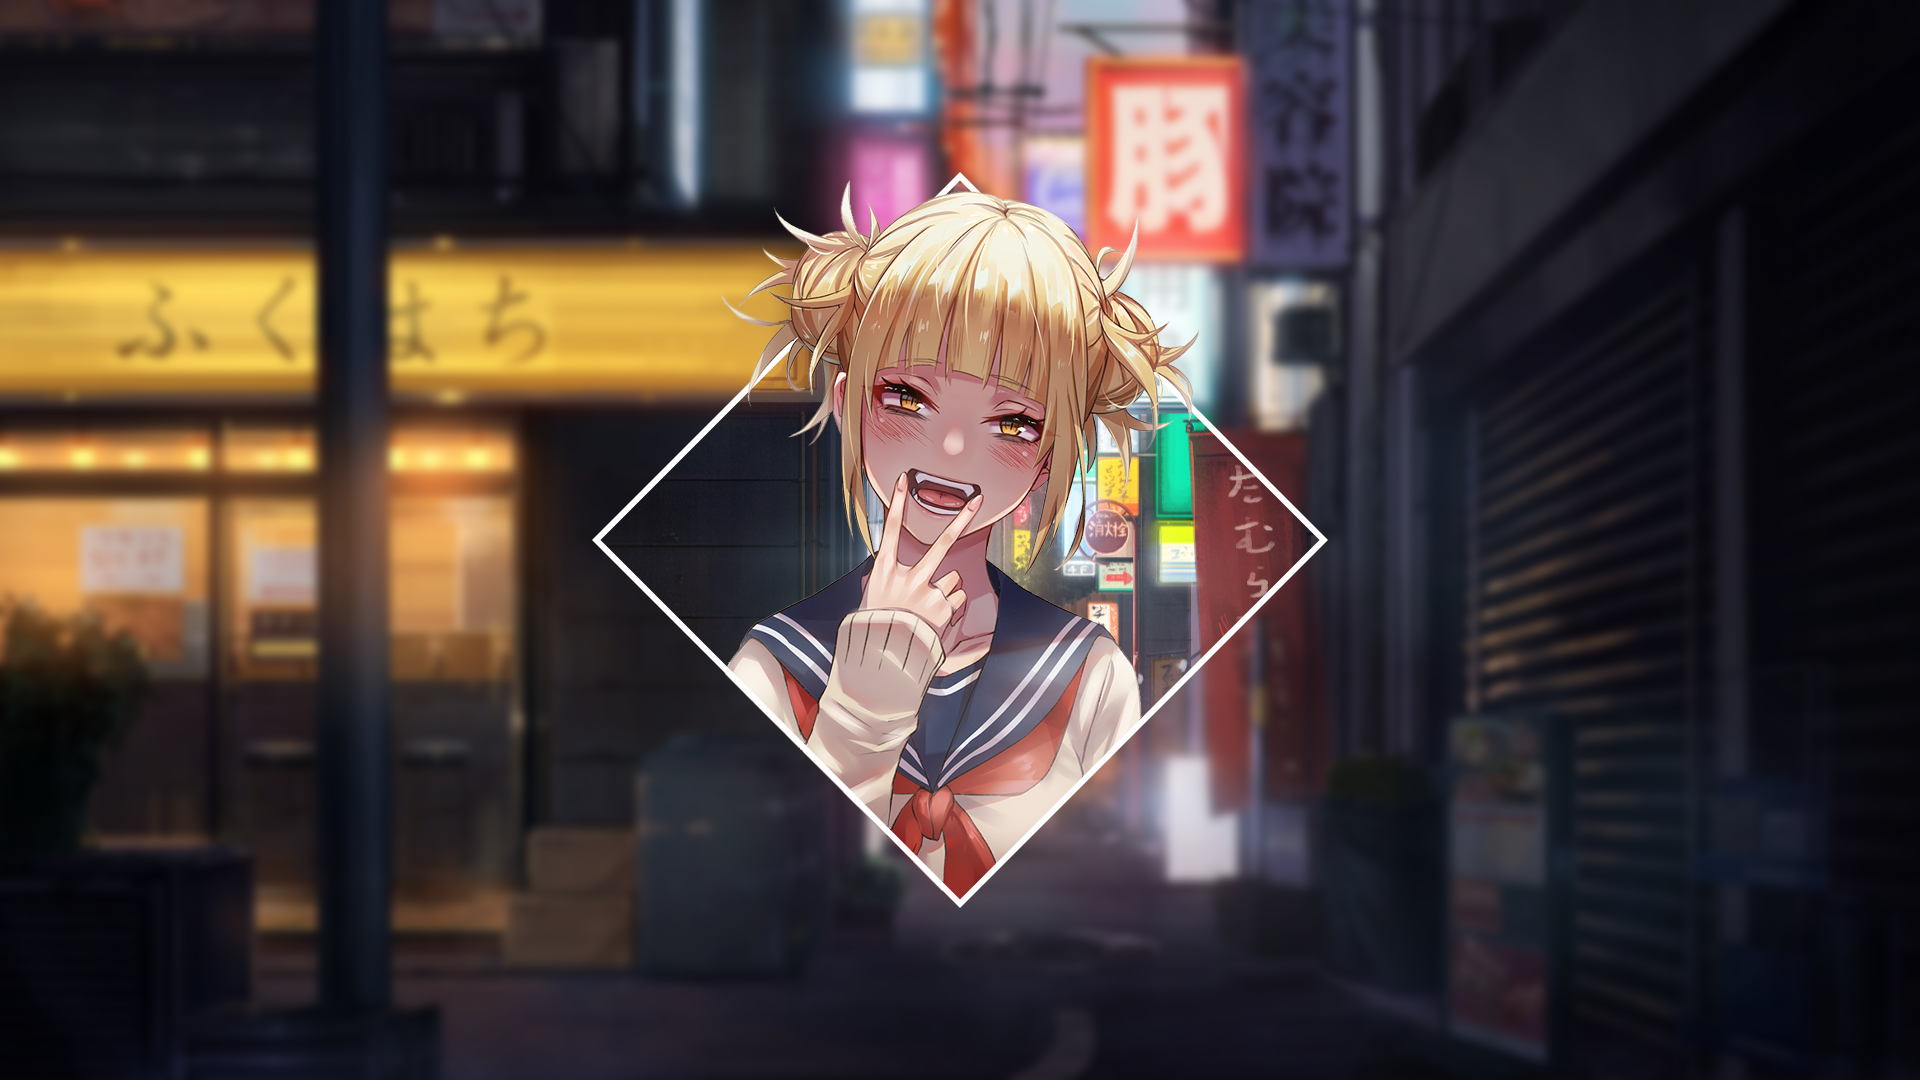 Toga (BNHA) [1920x1080] #Music #IndieArtist #Chicago. Himiko toga